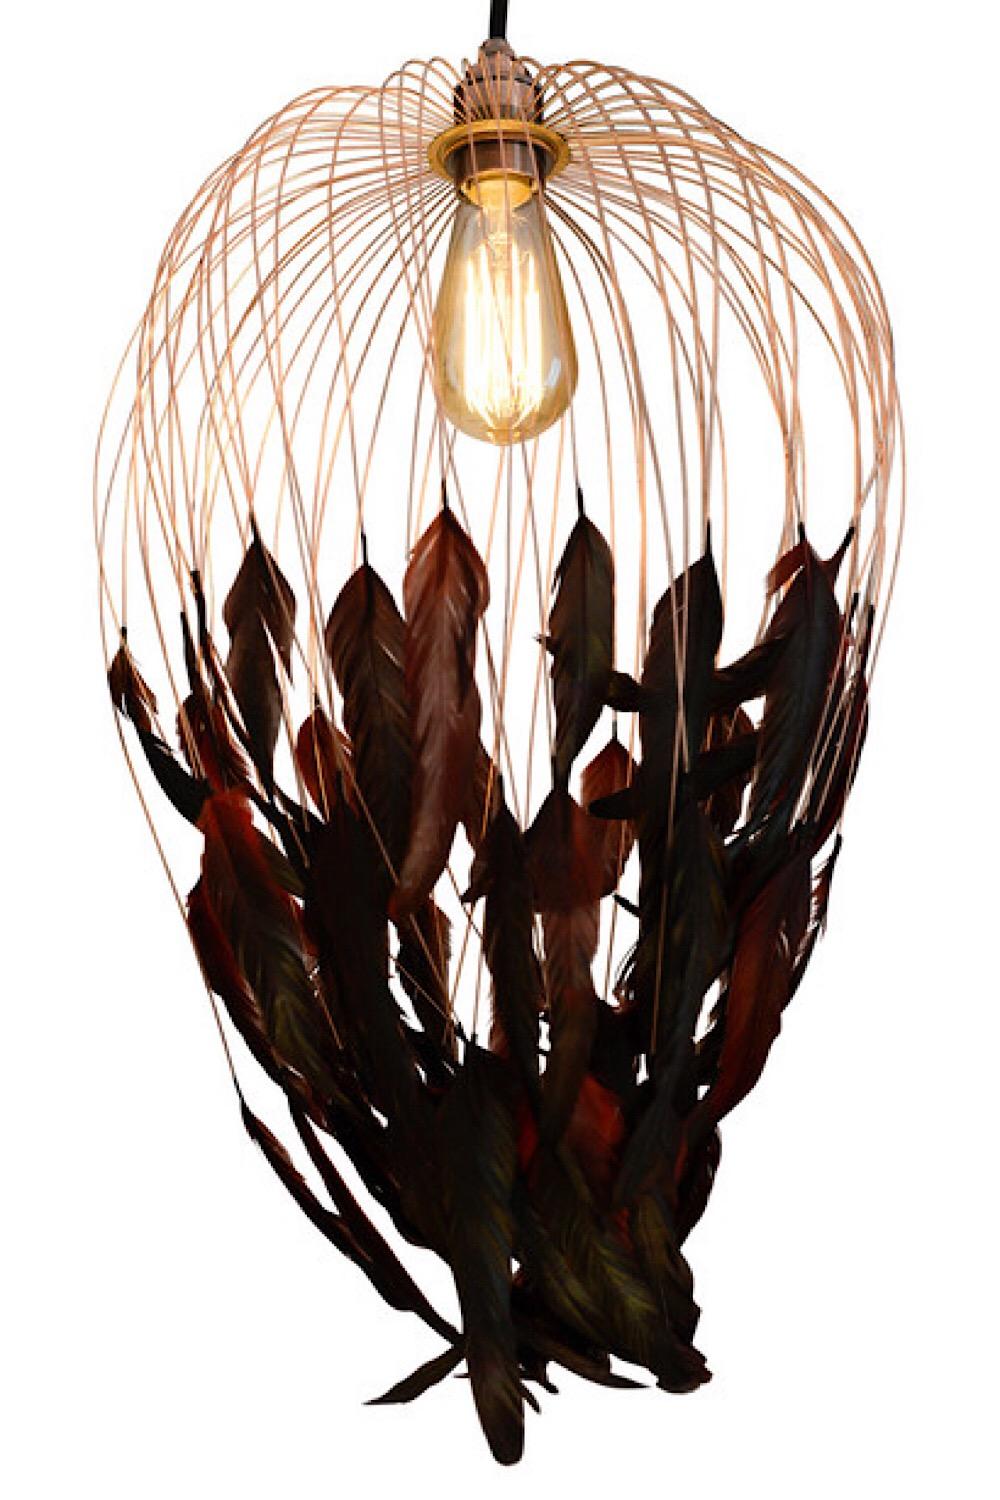 Feather chandelier pendant made of a metal structure and rooster tail feathers, handmade in France by the artist.
   